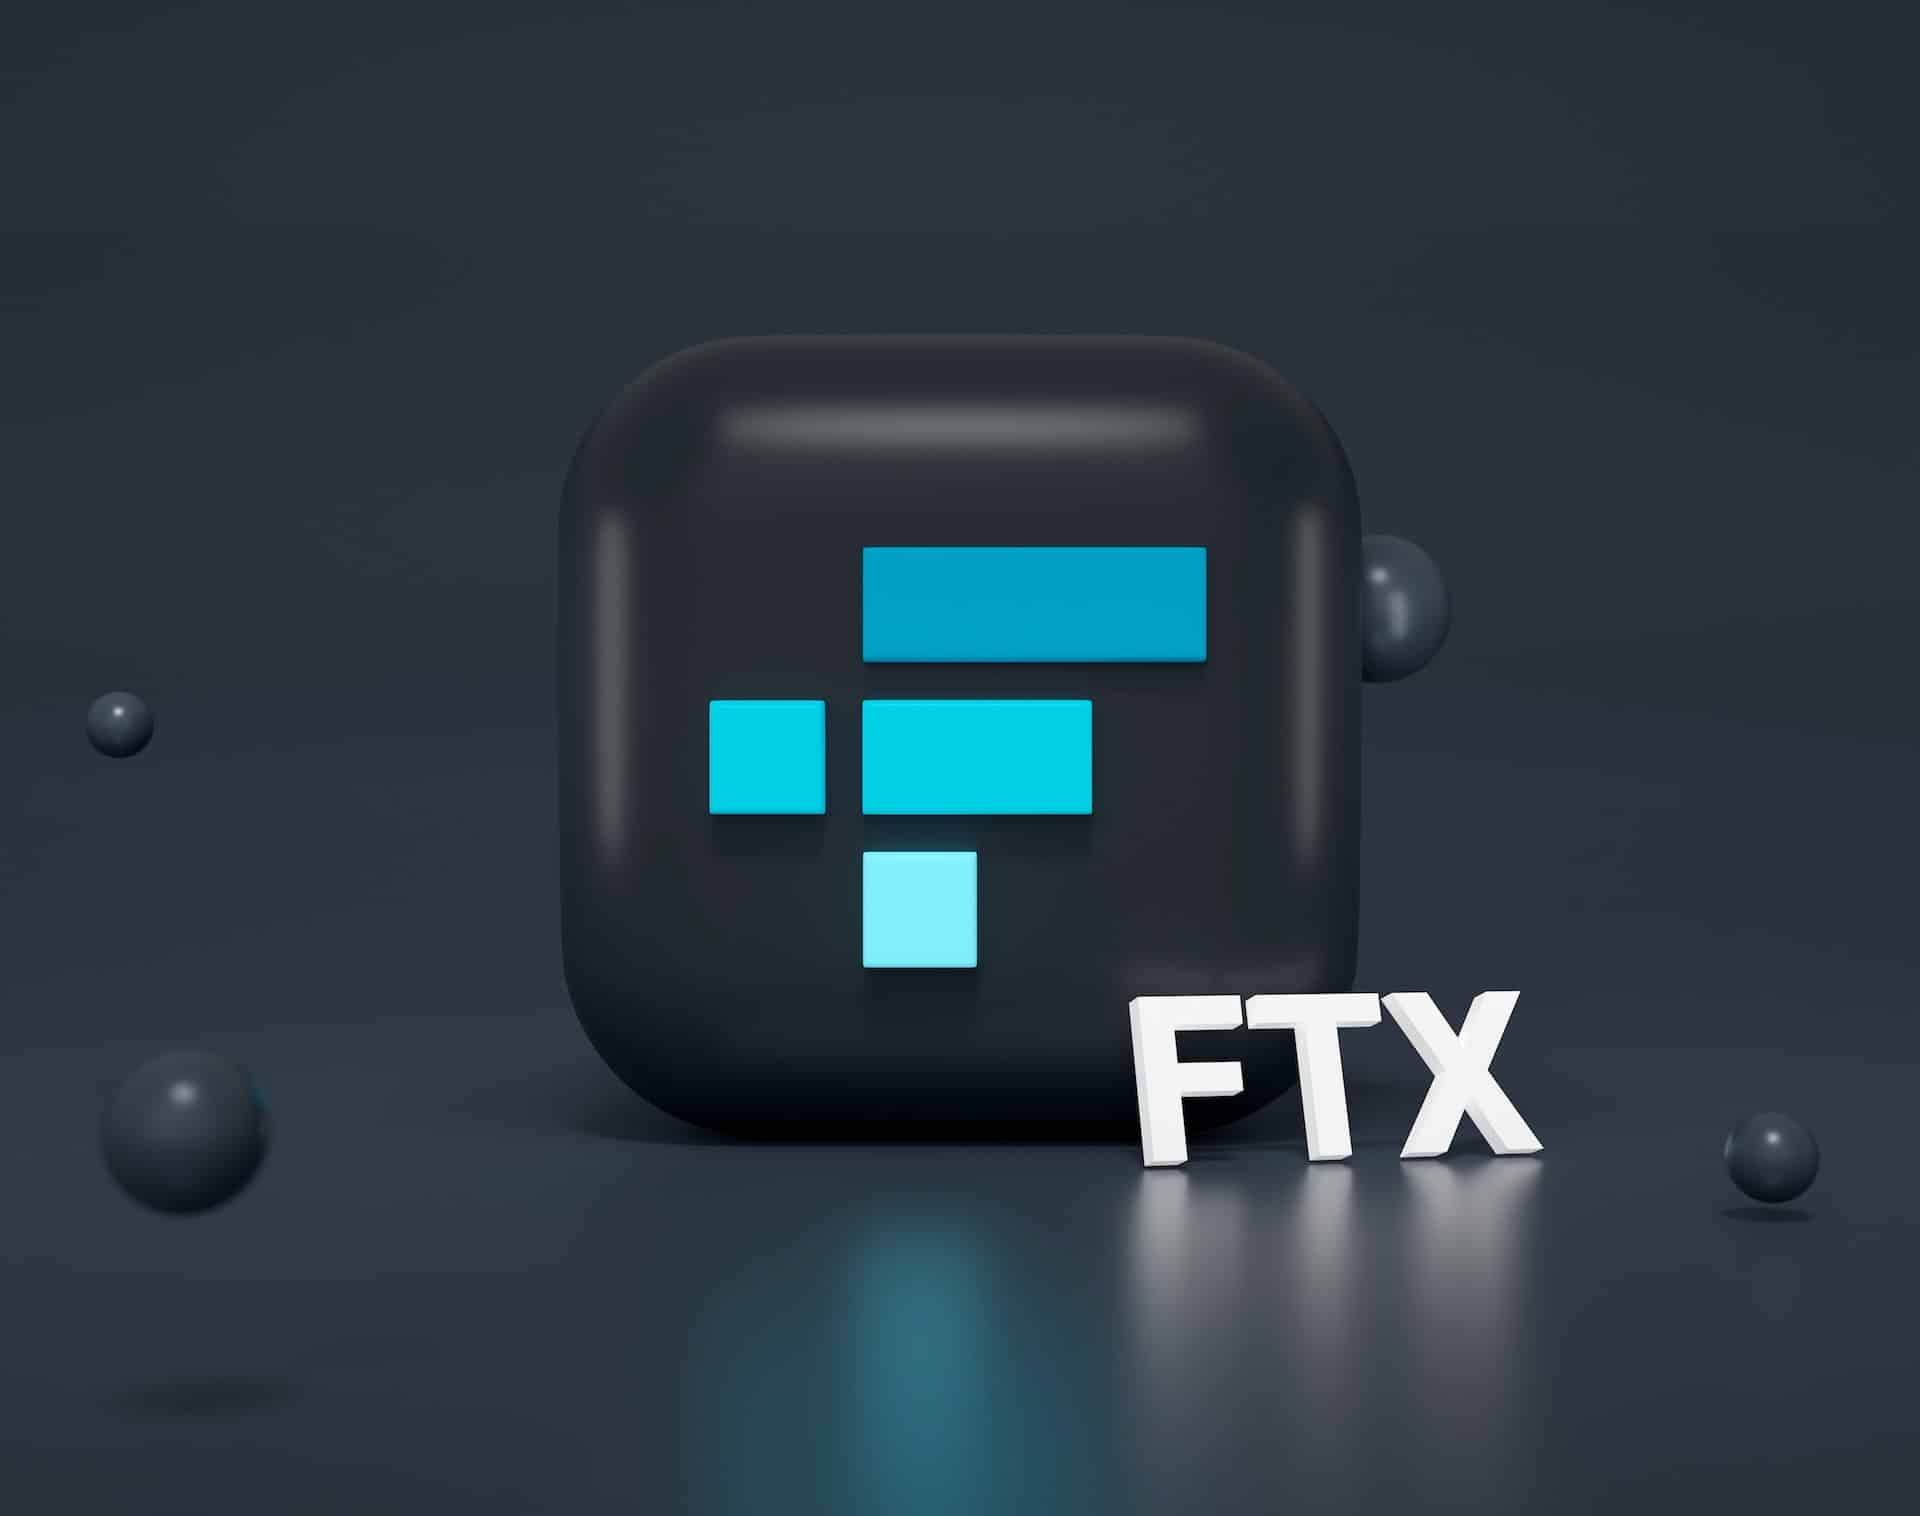 FTX's New CEO Dissociates Itself From Sam Bankman-Fried